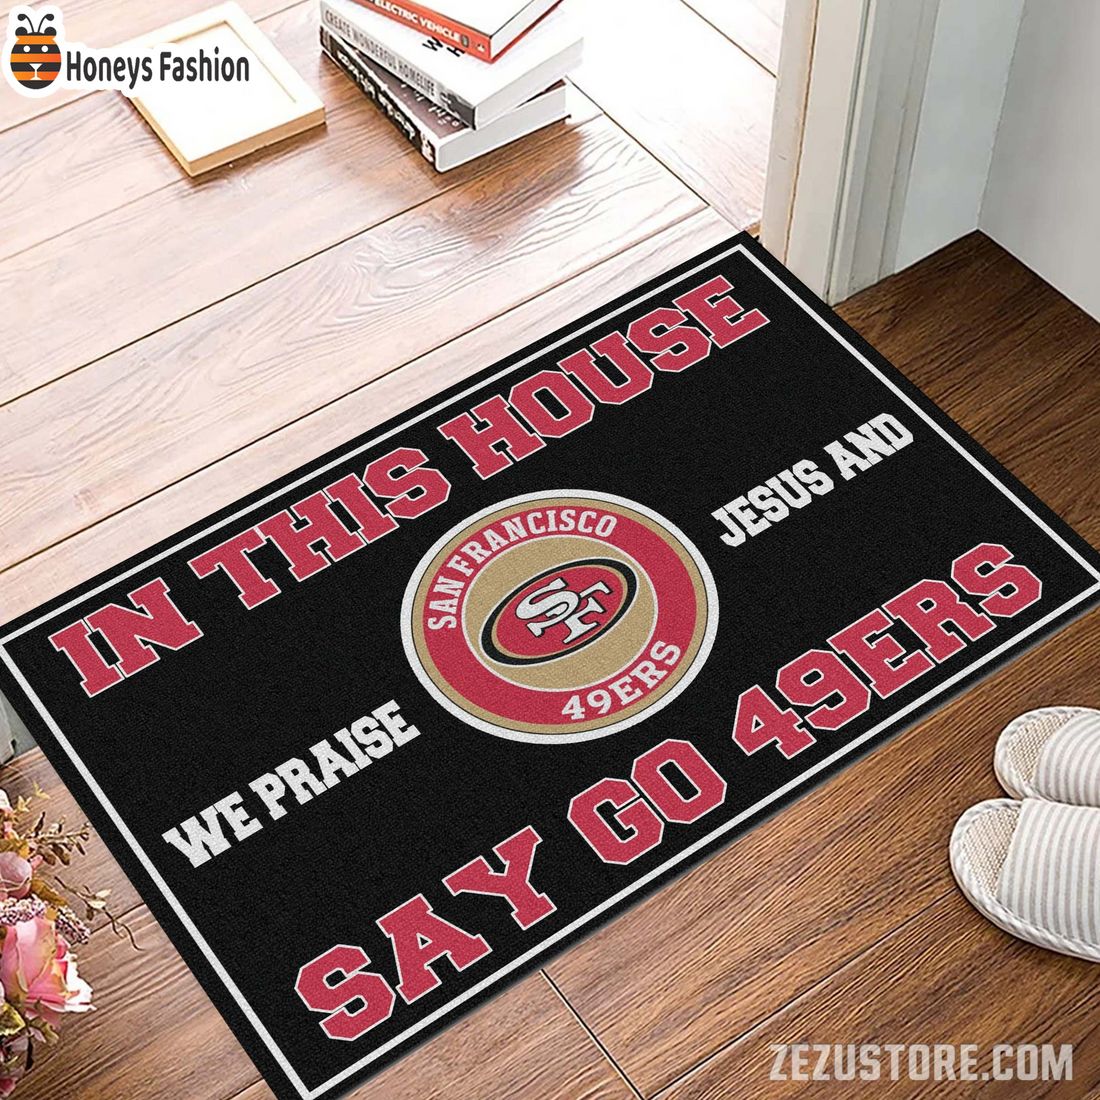 In this house we praise jesus and say go 49ers doormat